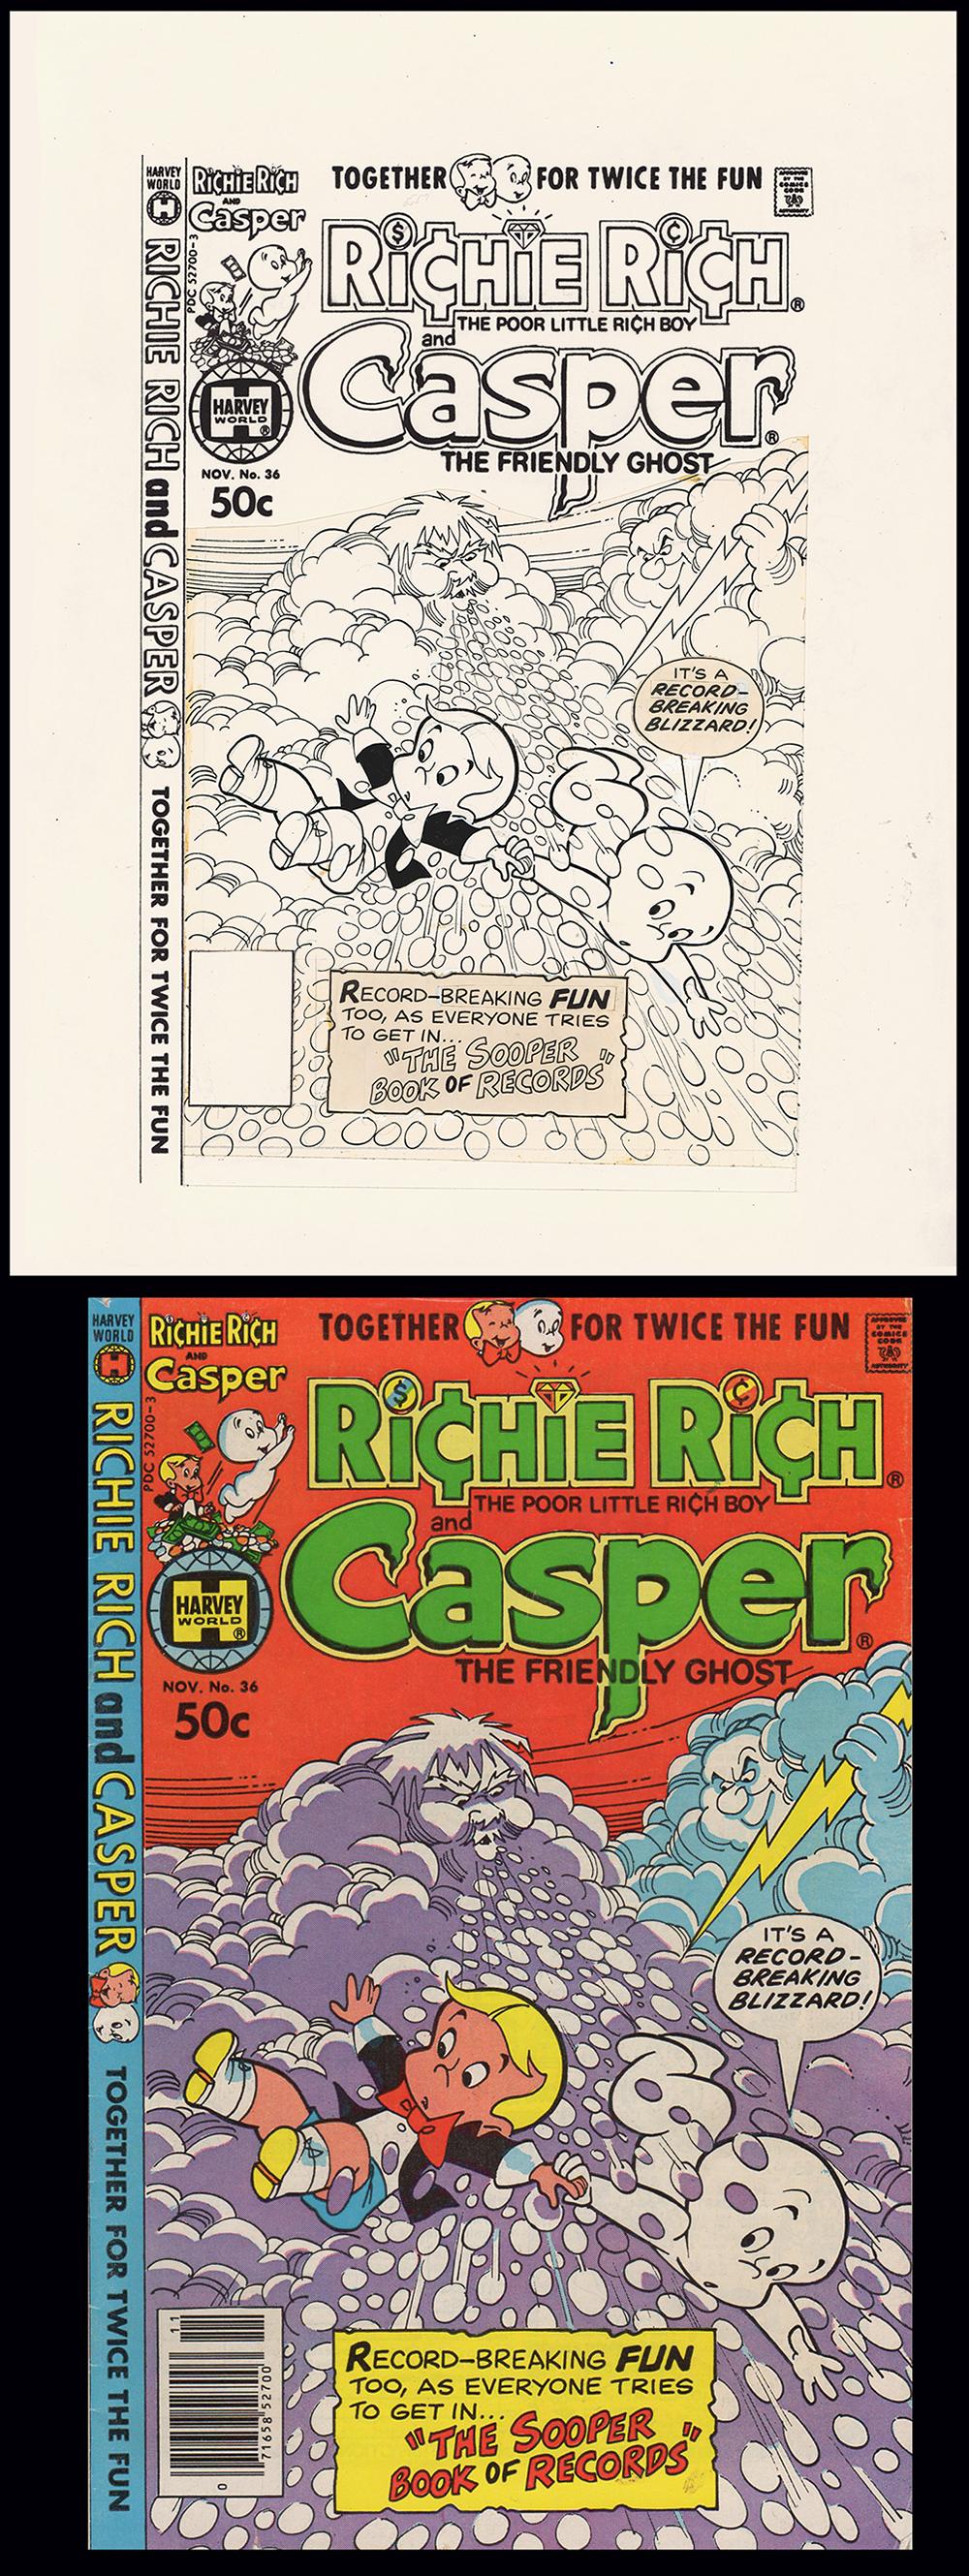 Image: Richie Rich and Casper the Friendly Ghost #36 Cover art by Ernie Colon